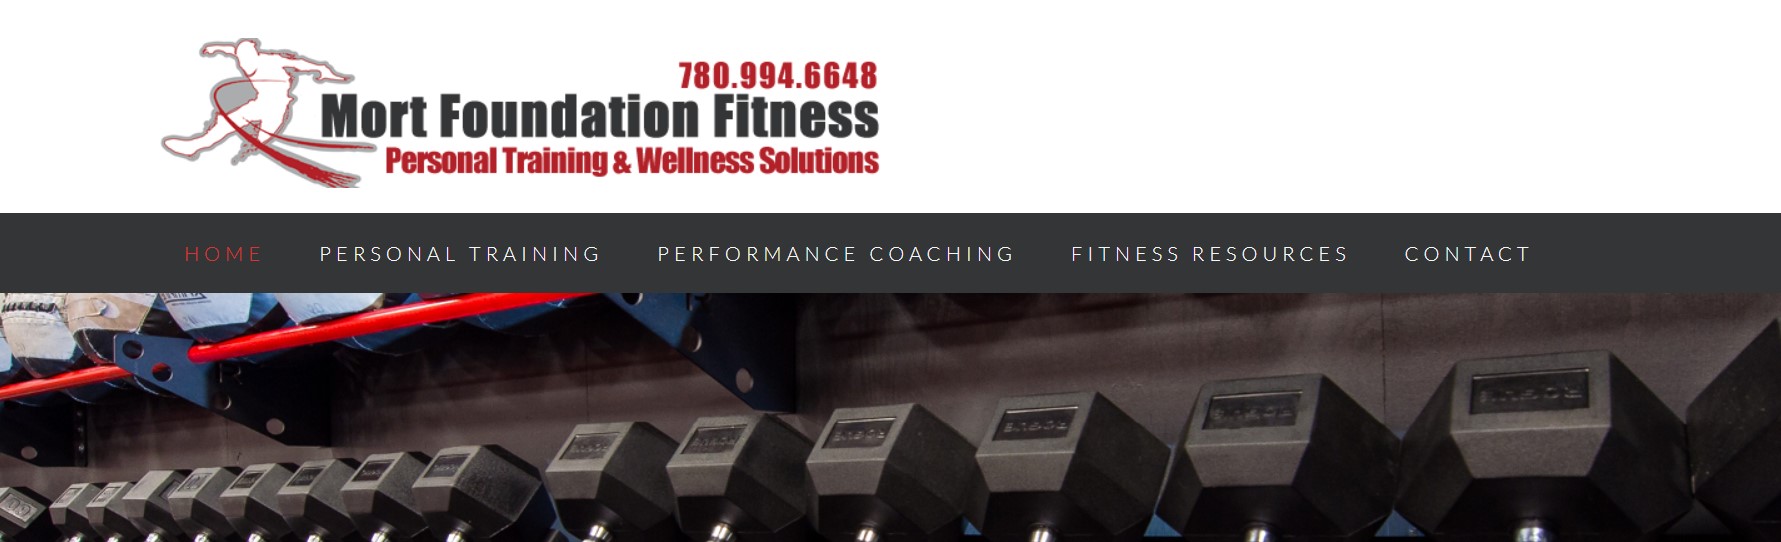 mort foundation fitness personal trainer in edmonton